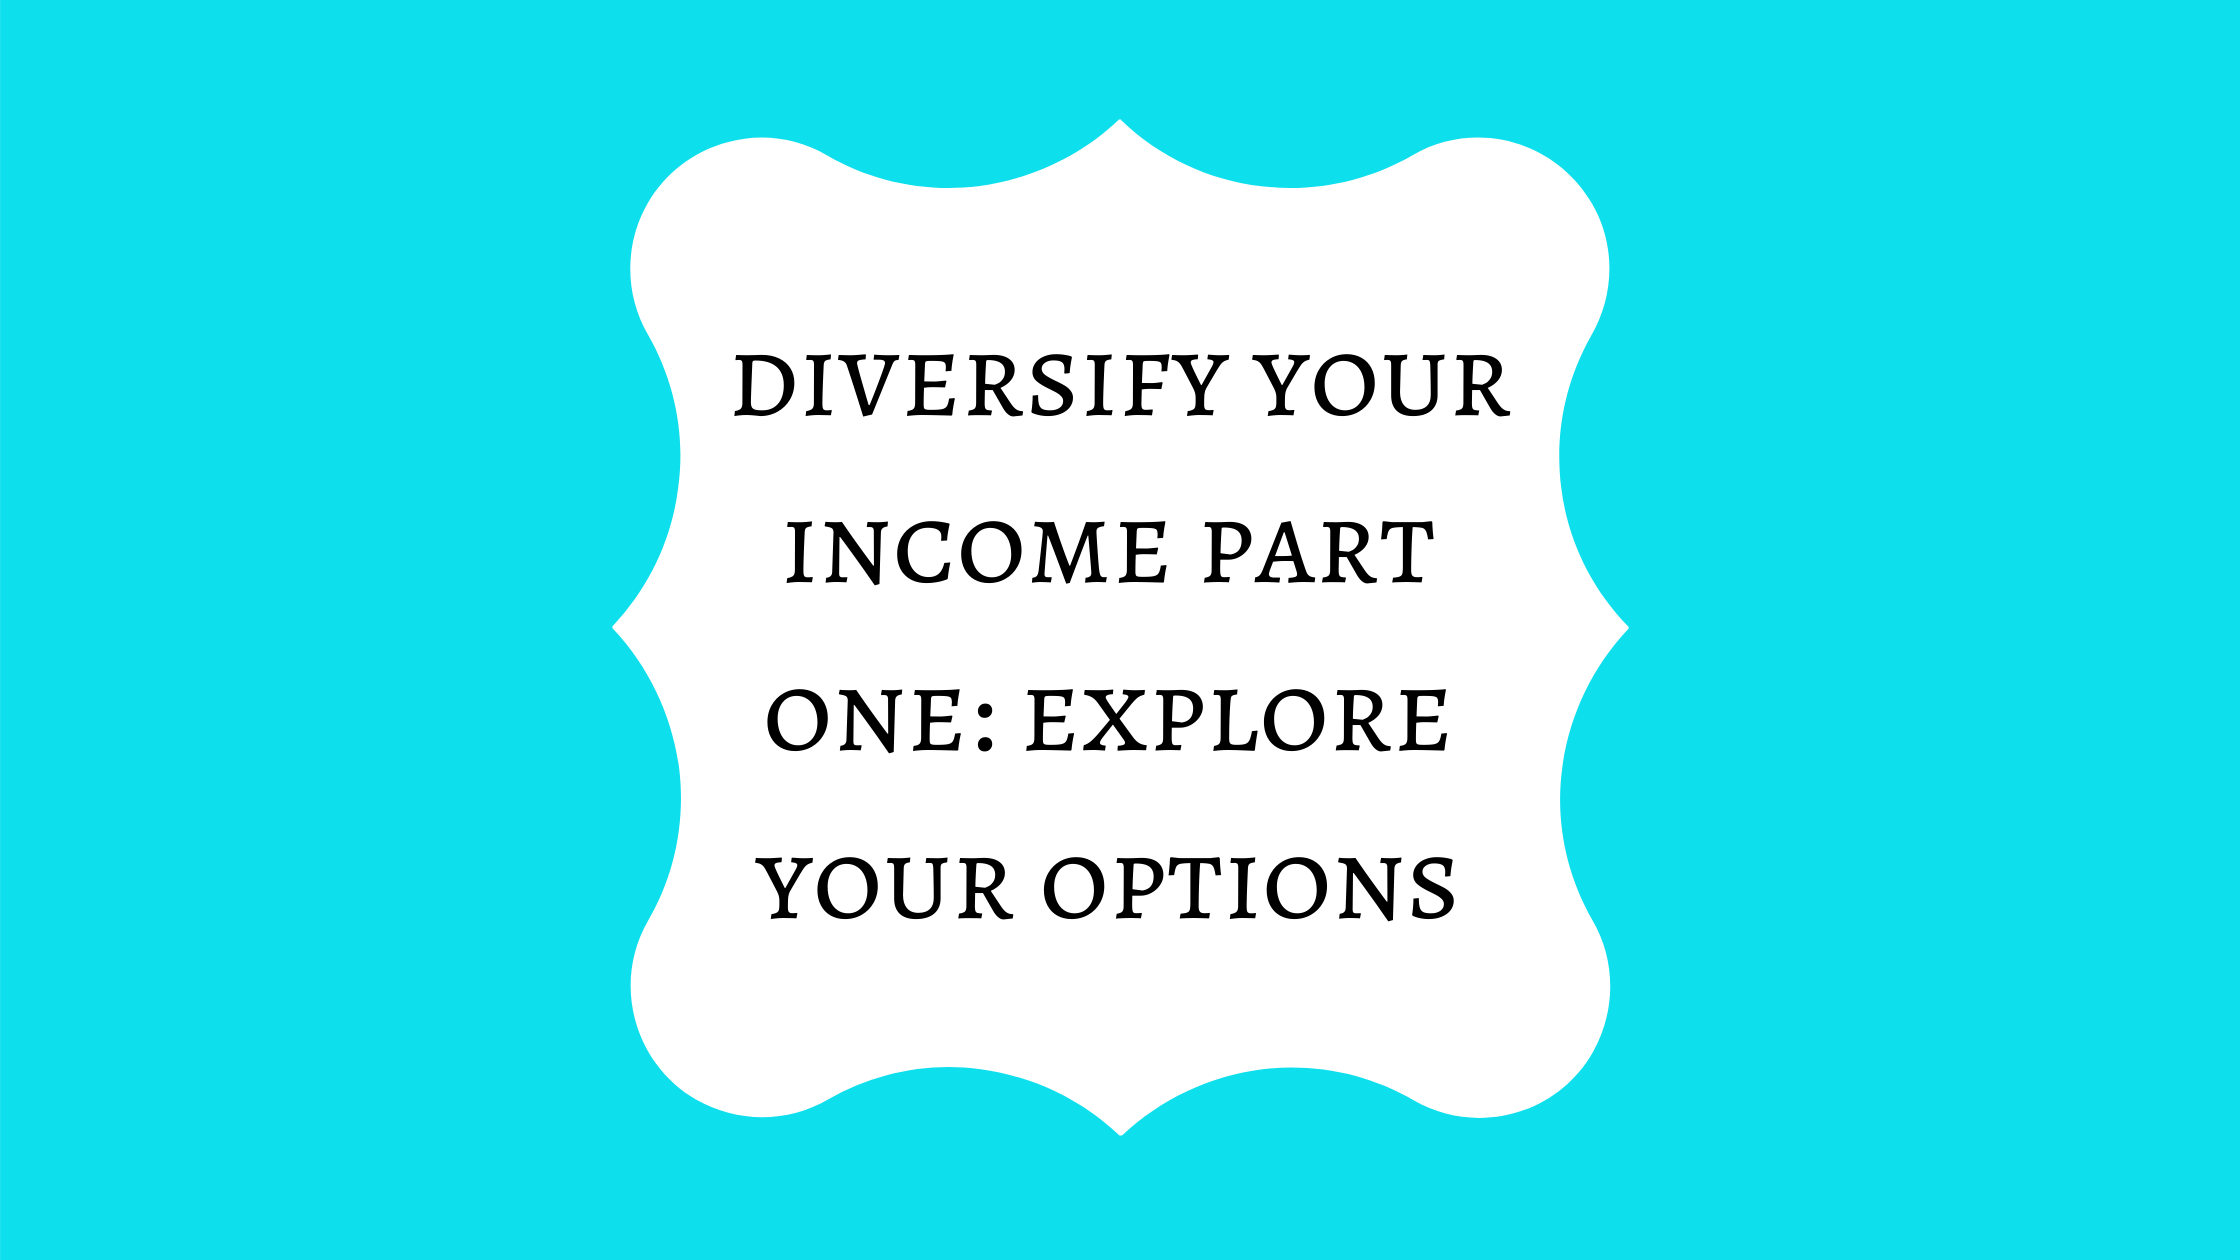 Diversify your income 1